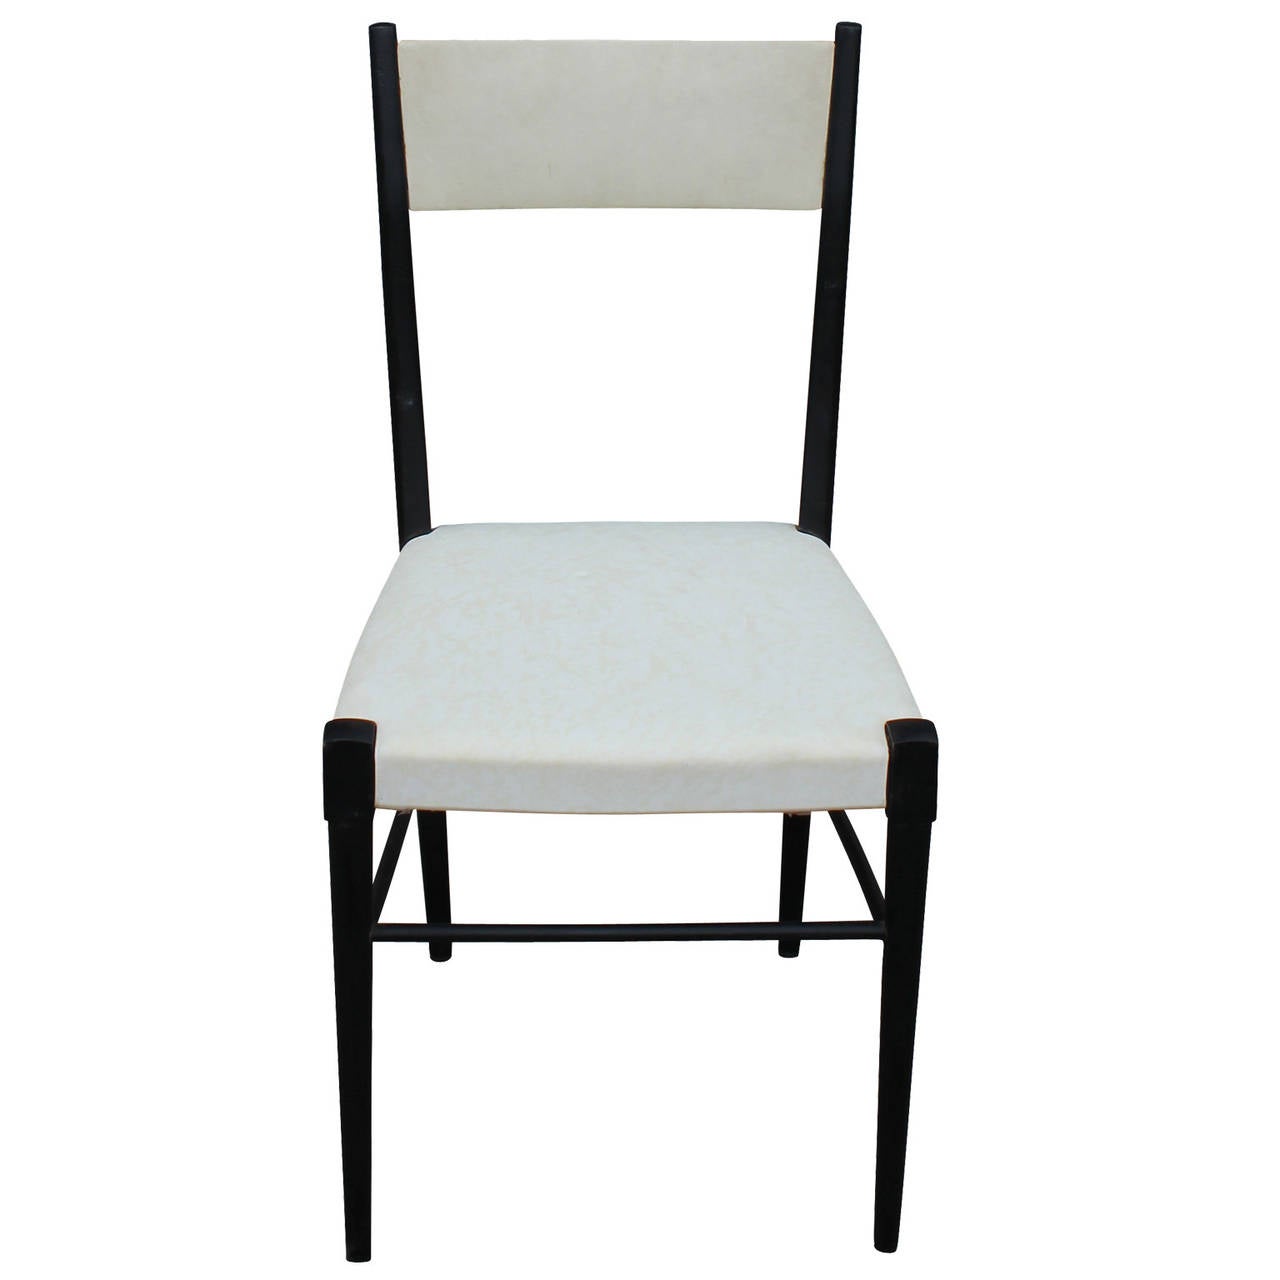 Set of six modernist, high back Italian dining chairs. Chairs have delicate tapered frames lacquered in black. Floating back rests and seats are upholstered in the original white vinyl. In nice vintage condition.